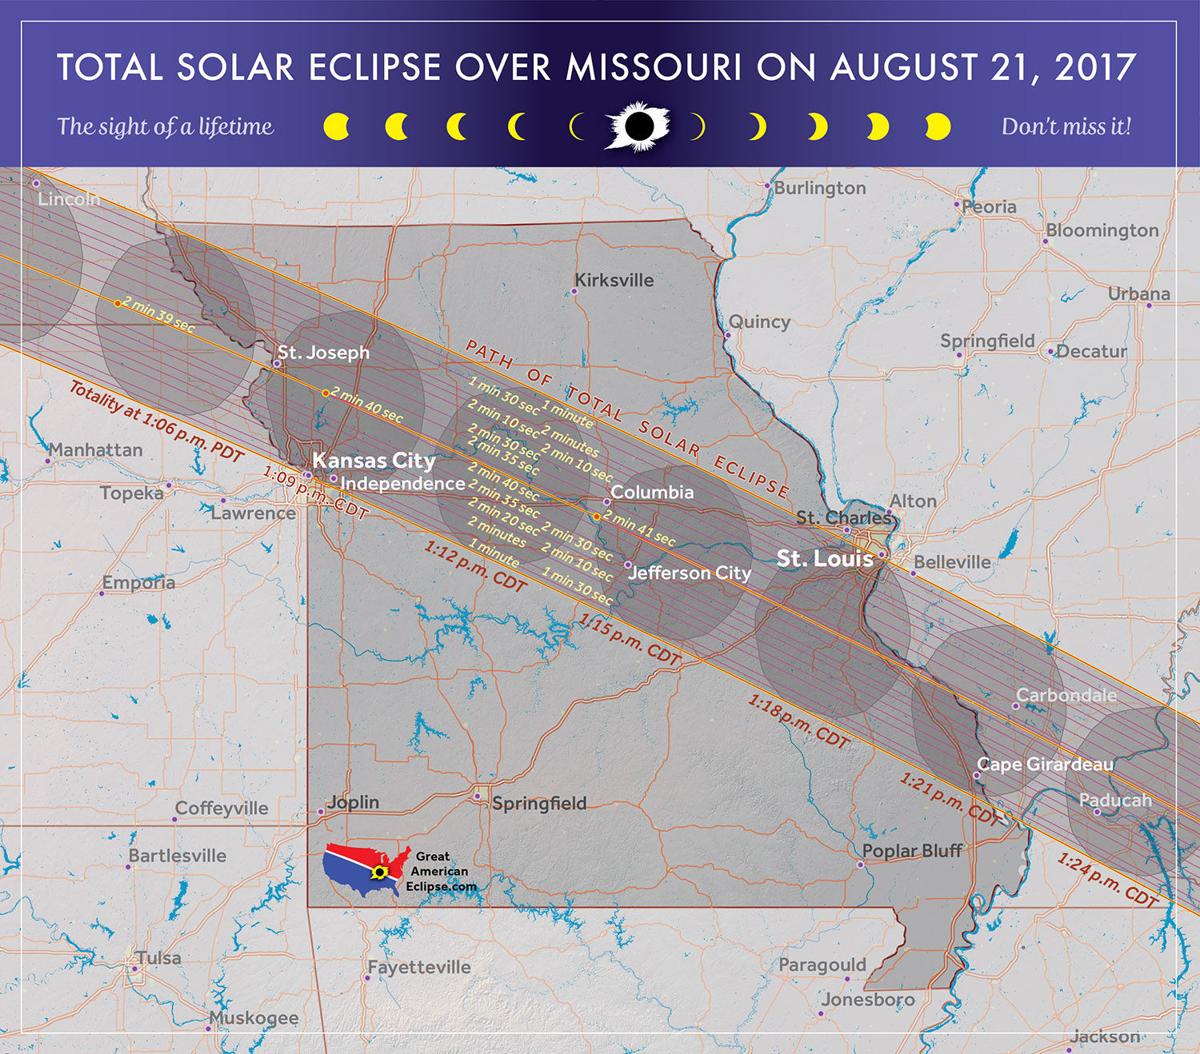 What Tulsans need to know about the solar eclipse on August 21